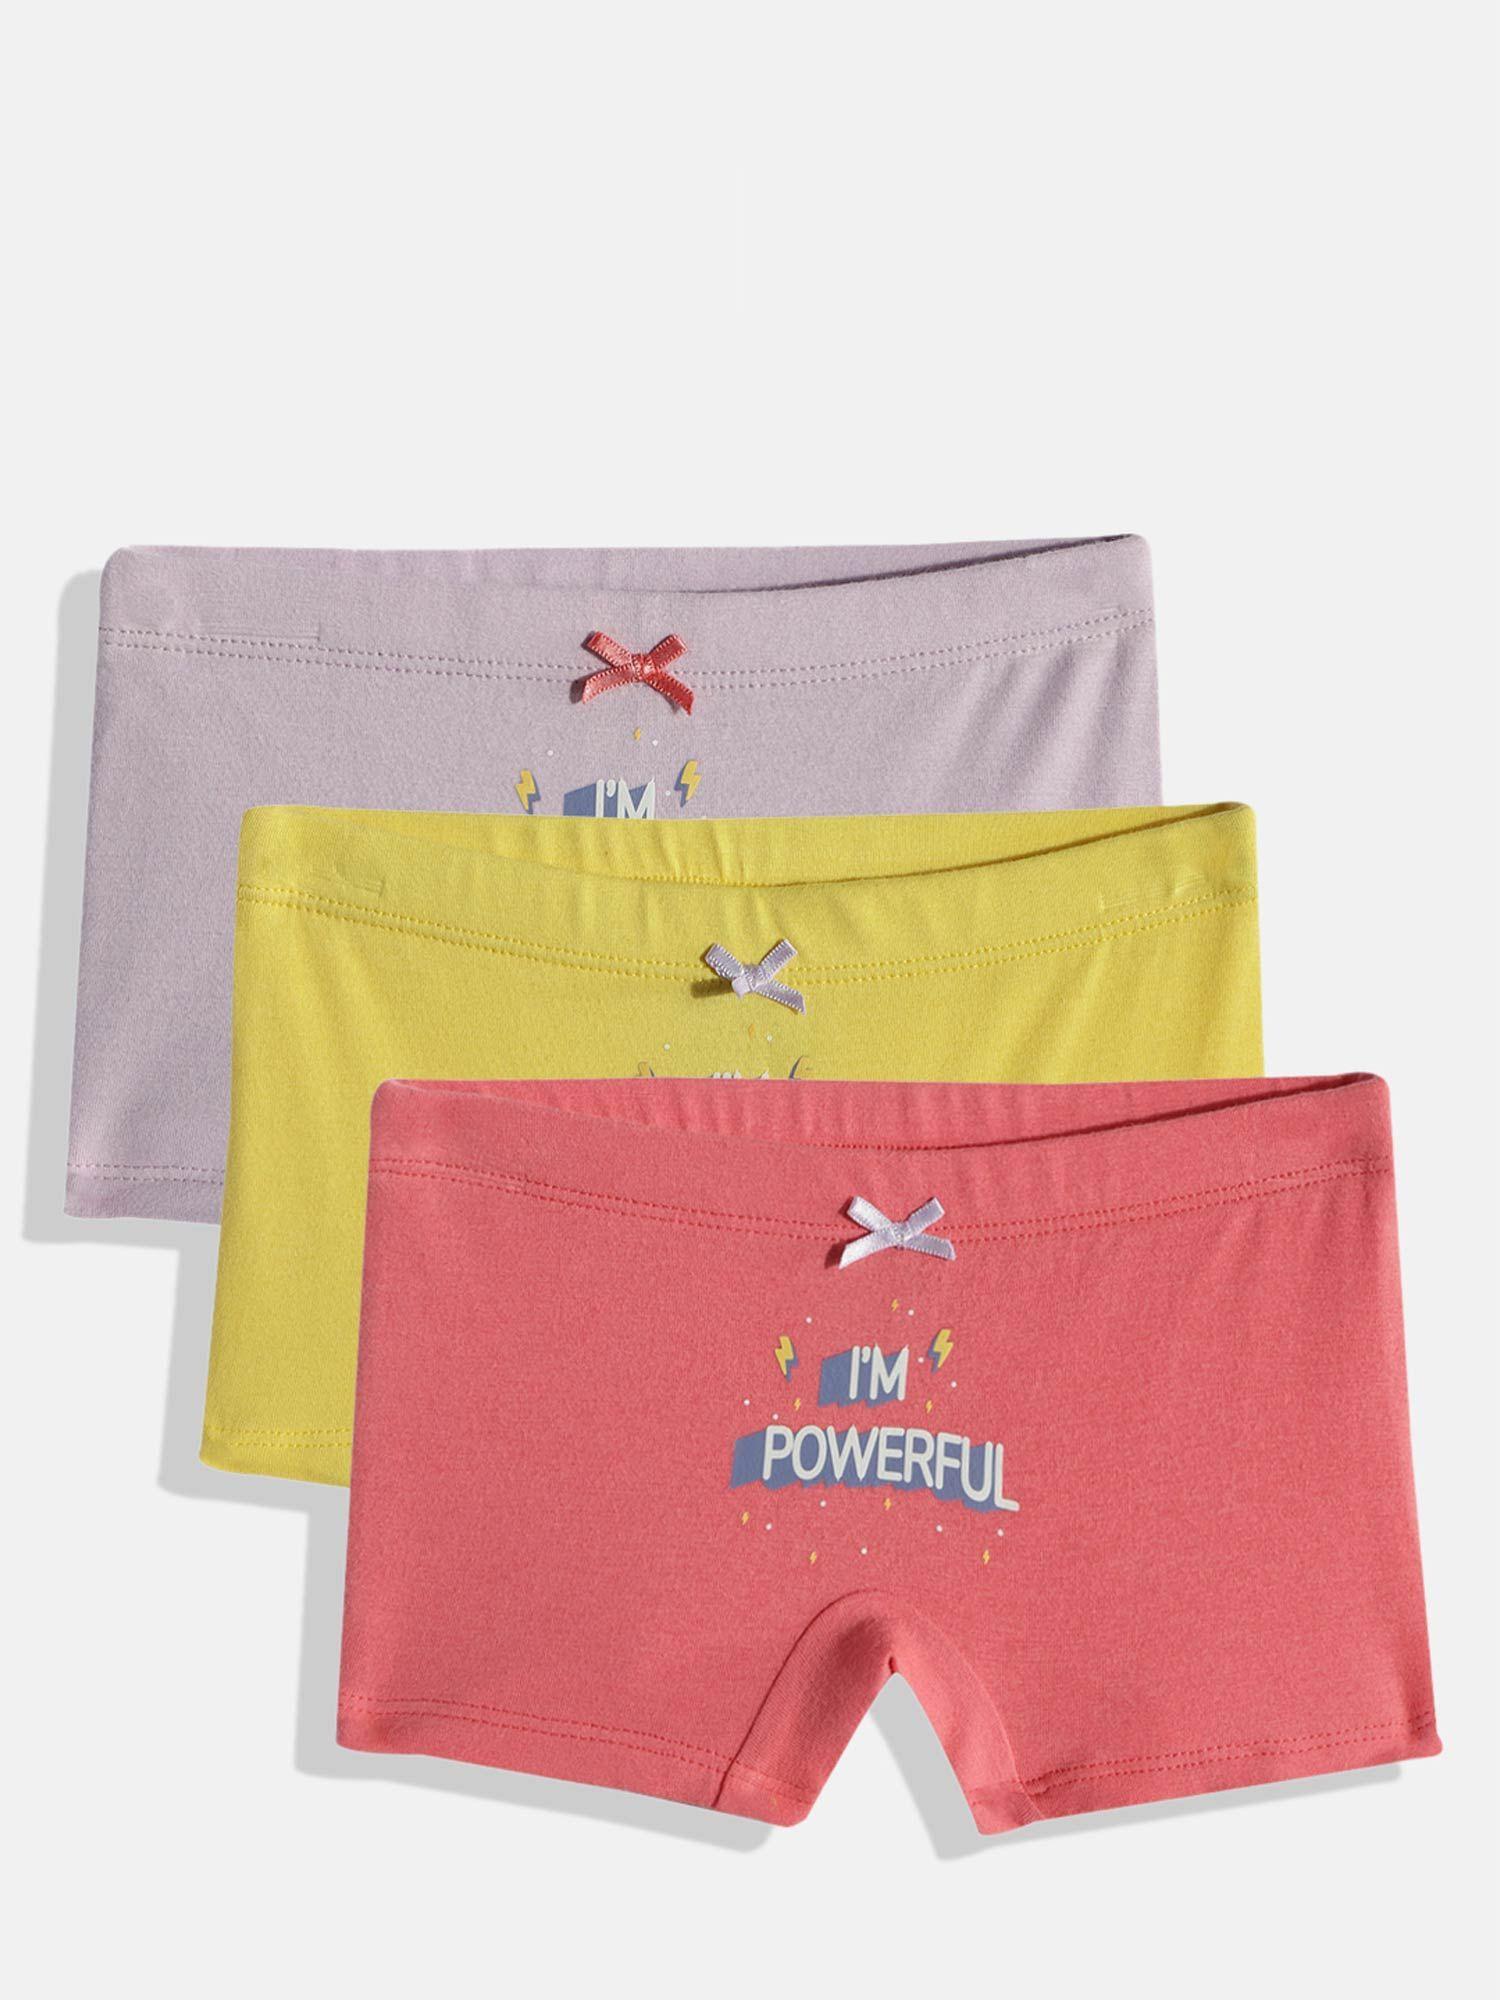 multi-color-printed-girls-boxers-(pack-of-3)